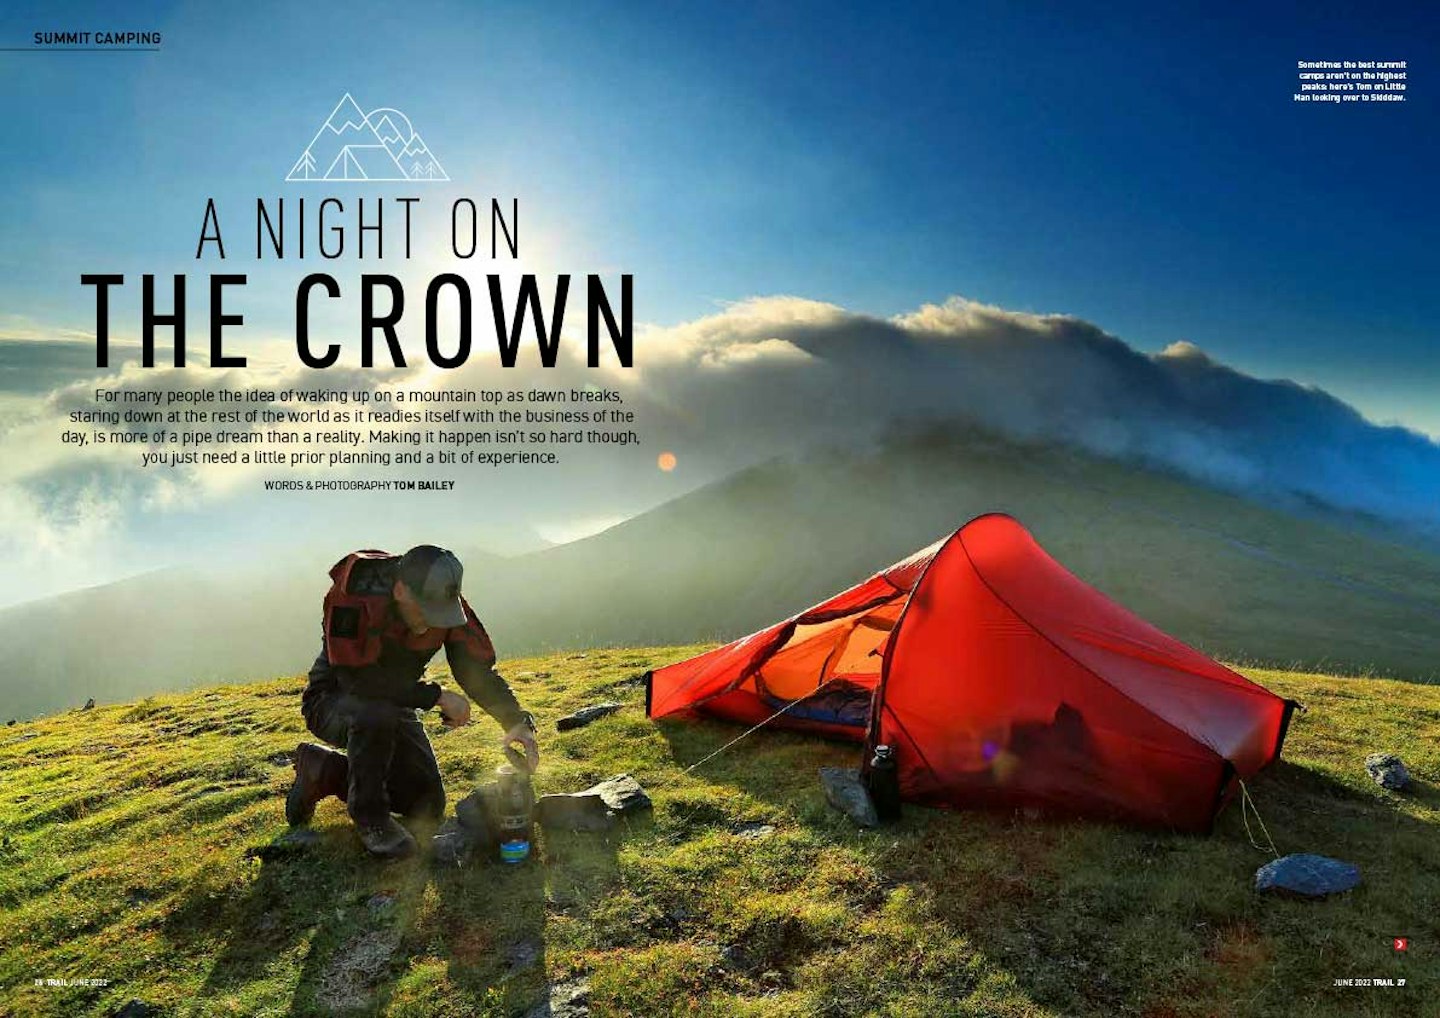 Trail magazine article - A night on the crown